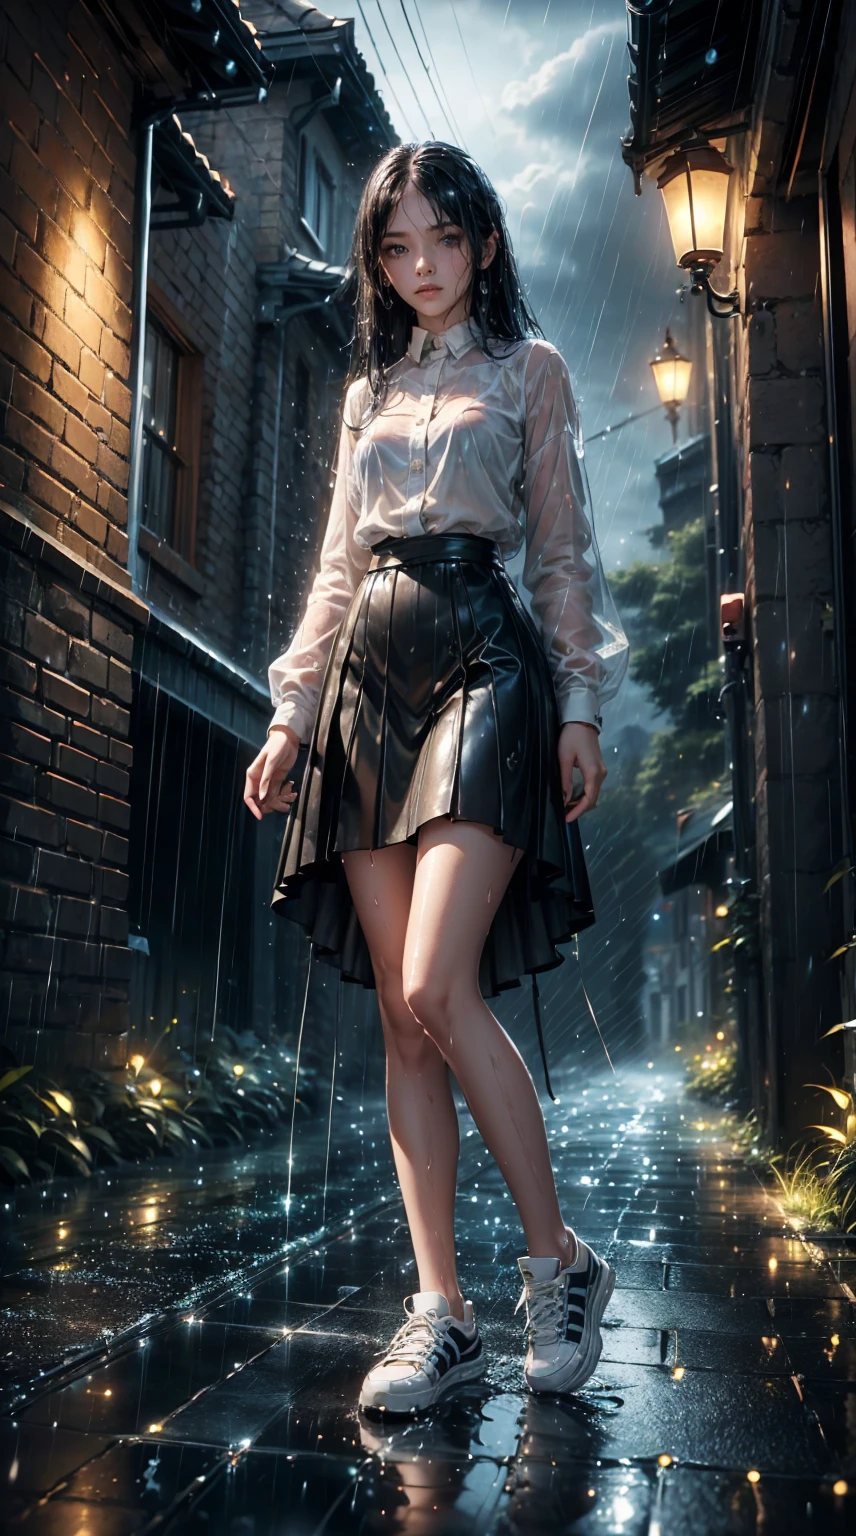 {Freya Tingley, slender, slim waist, perfect body, she is in an alley Against a wall, Brick wall, doodling, Dim lighting, alley}, (long black hair), (detailed eyes), (bright green eyes), (shy appearance wearing a large shirt, broad shoulders and a very short black genuine leather skirt), ((white Adidas sneakers), (it's raining, rainy weather, cloudy sky raining, she's all wet), full body, view from below.